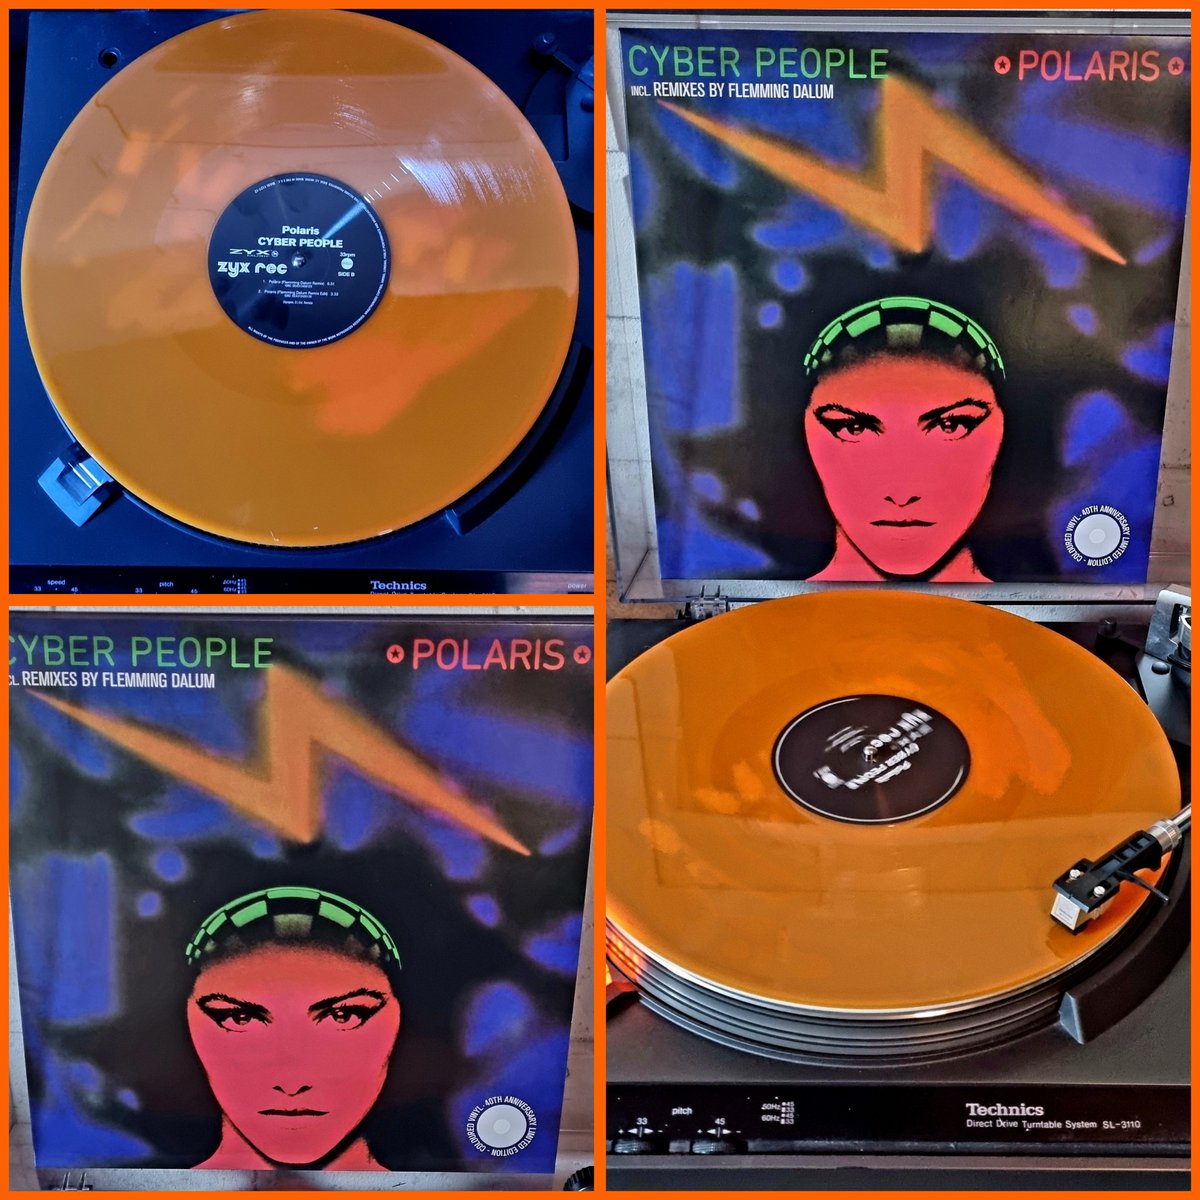 Yessss the postman just delivered this great  new 🔥  piece of vinyl ! 😍🎶 🇮🇹 'Cyber People - Polaris ' Including @FlemmingDalum remixes ' 👍🎶🔥 @Official_ZYX  #italodisco #ZYX  #orangevinyl  #vinylcommunity #musthave #happy 🥰🎶🎵